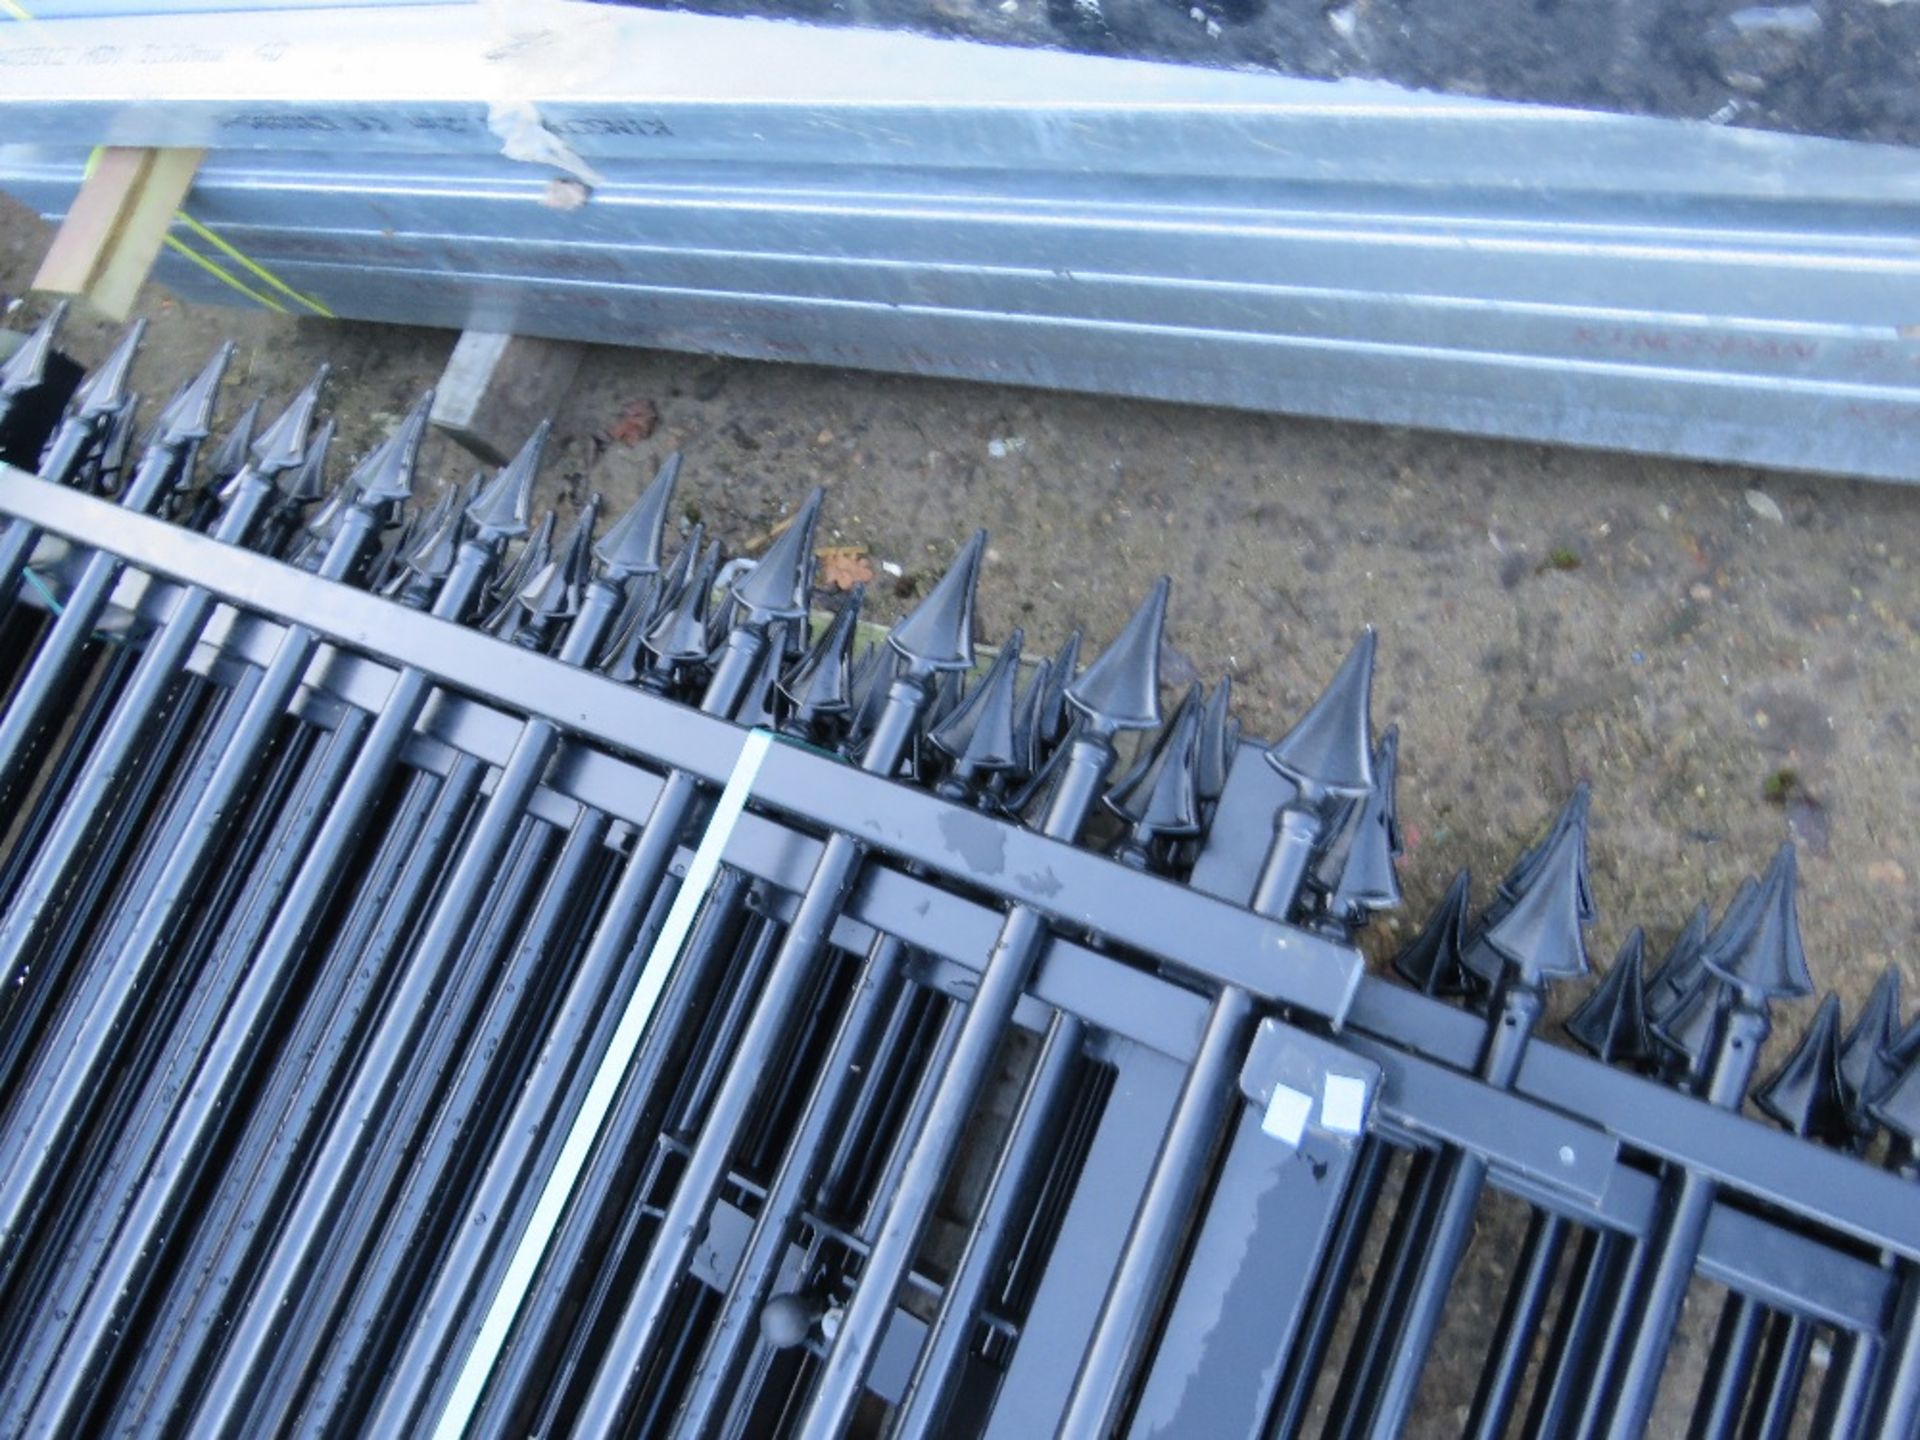 STACK OF BLACK STEEL ORNAMENTAL FENCING, 1.5M HEIGHT, UNUSED. 18M LENGTH APPROX WITH 2 X GATES@1.5M - Image 3 of 3